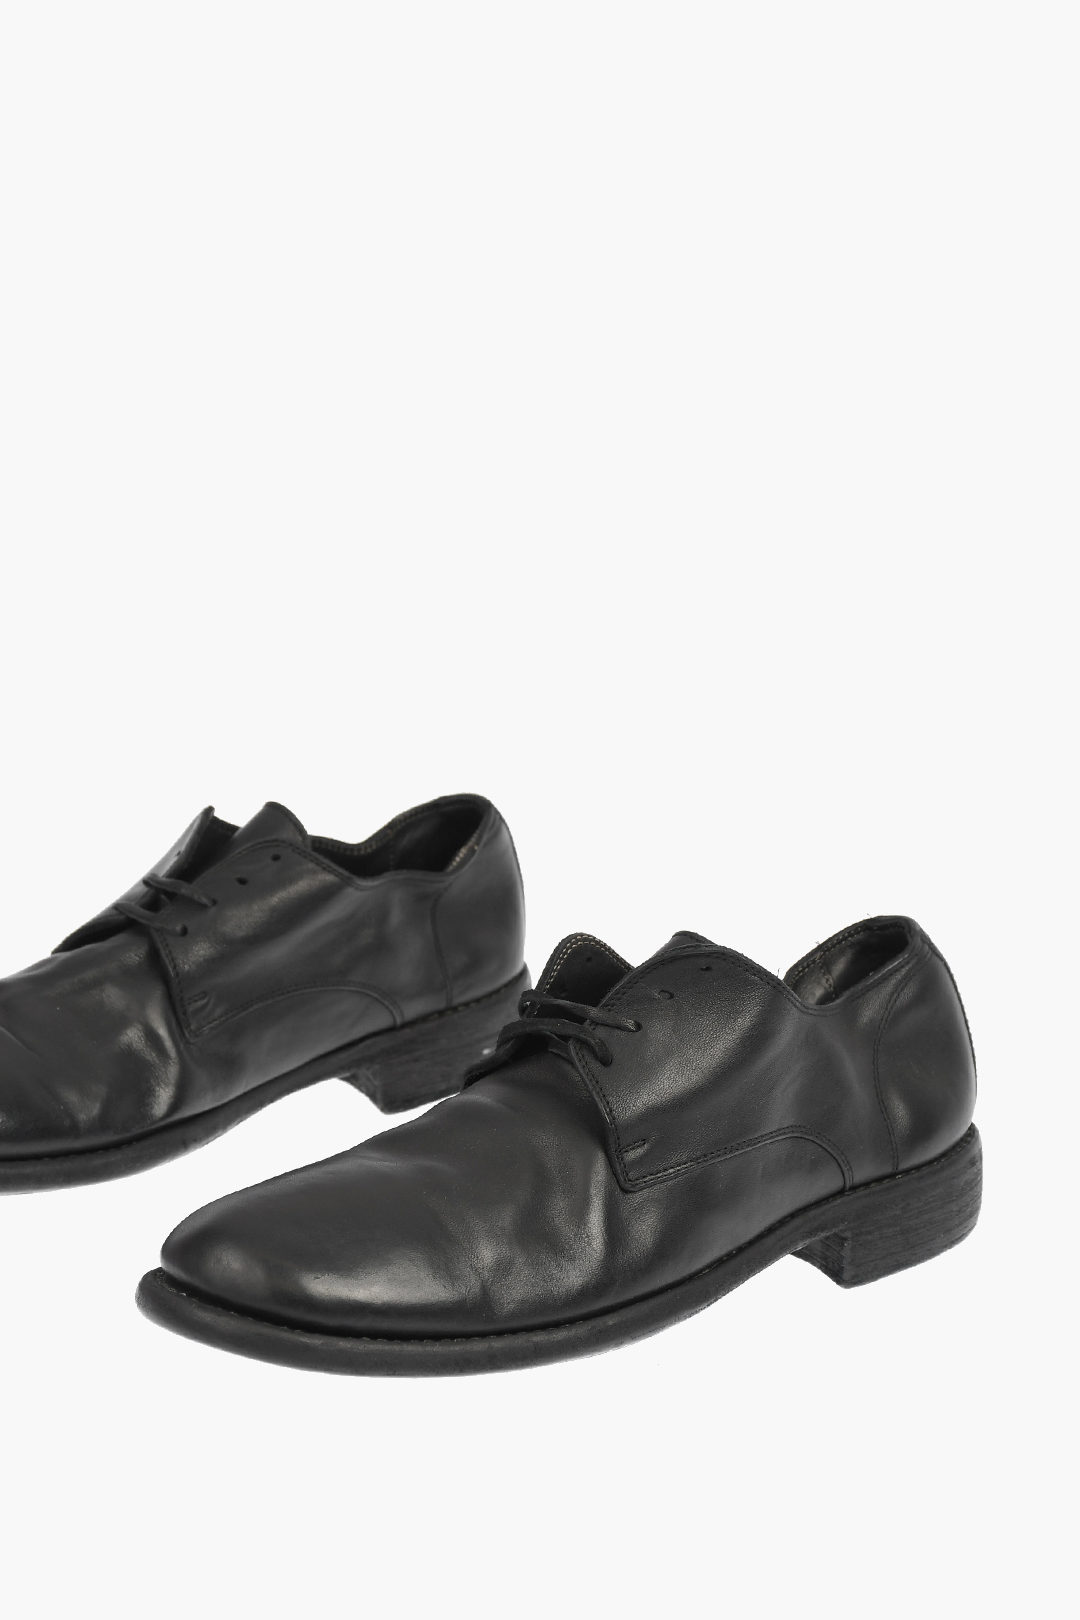 Guidi Leather Derby Lace-ups in Nero Black for Men Mens Shoes Lace-ups Derby shoes 